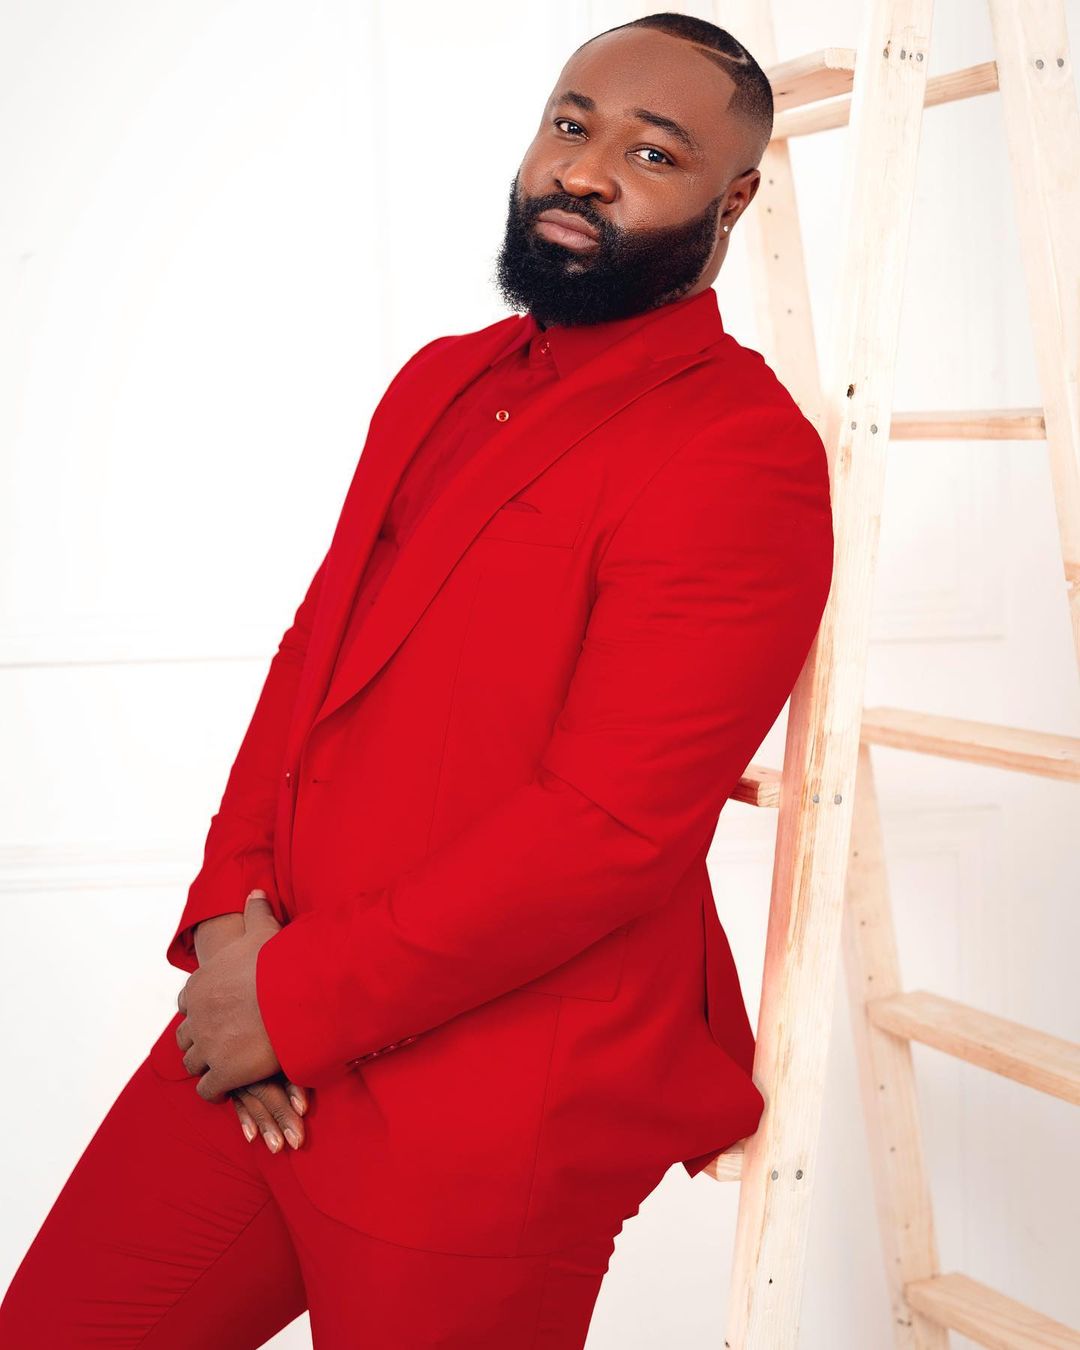 “Early Christmas Gift" Singer Harrysong Writes As He Buys 2 New Cars 